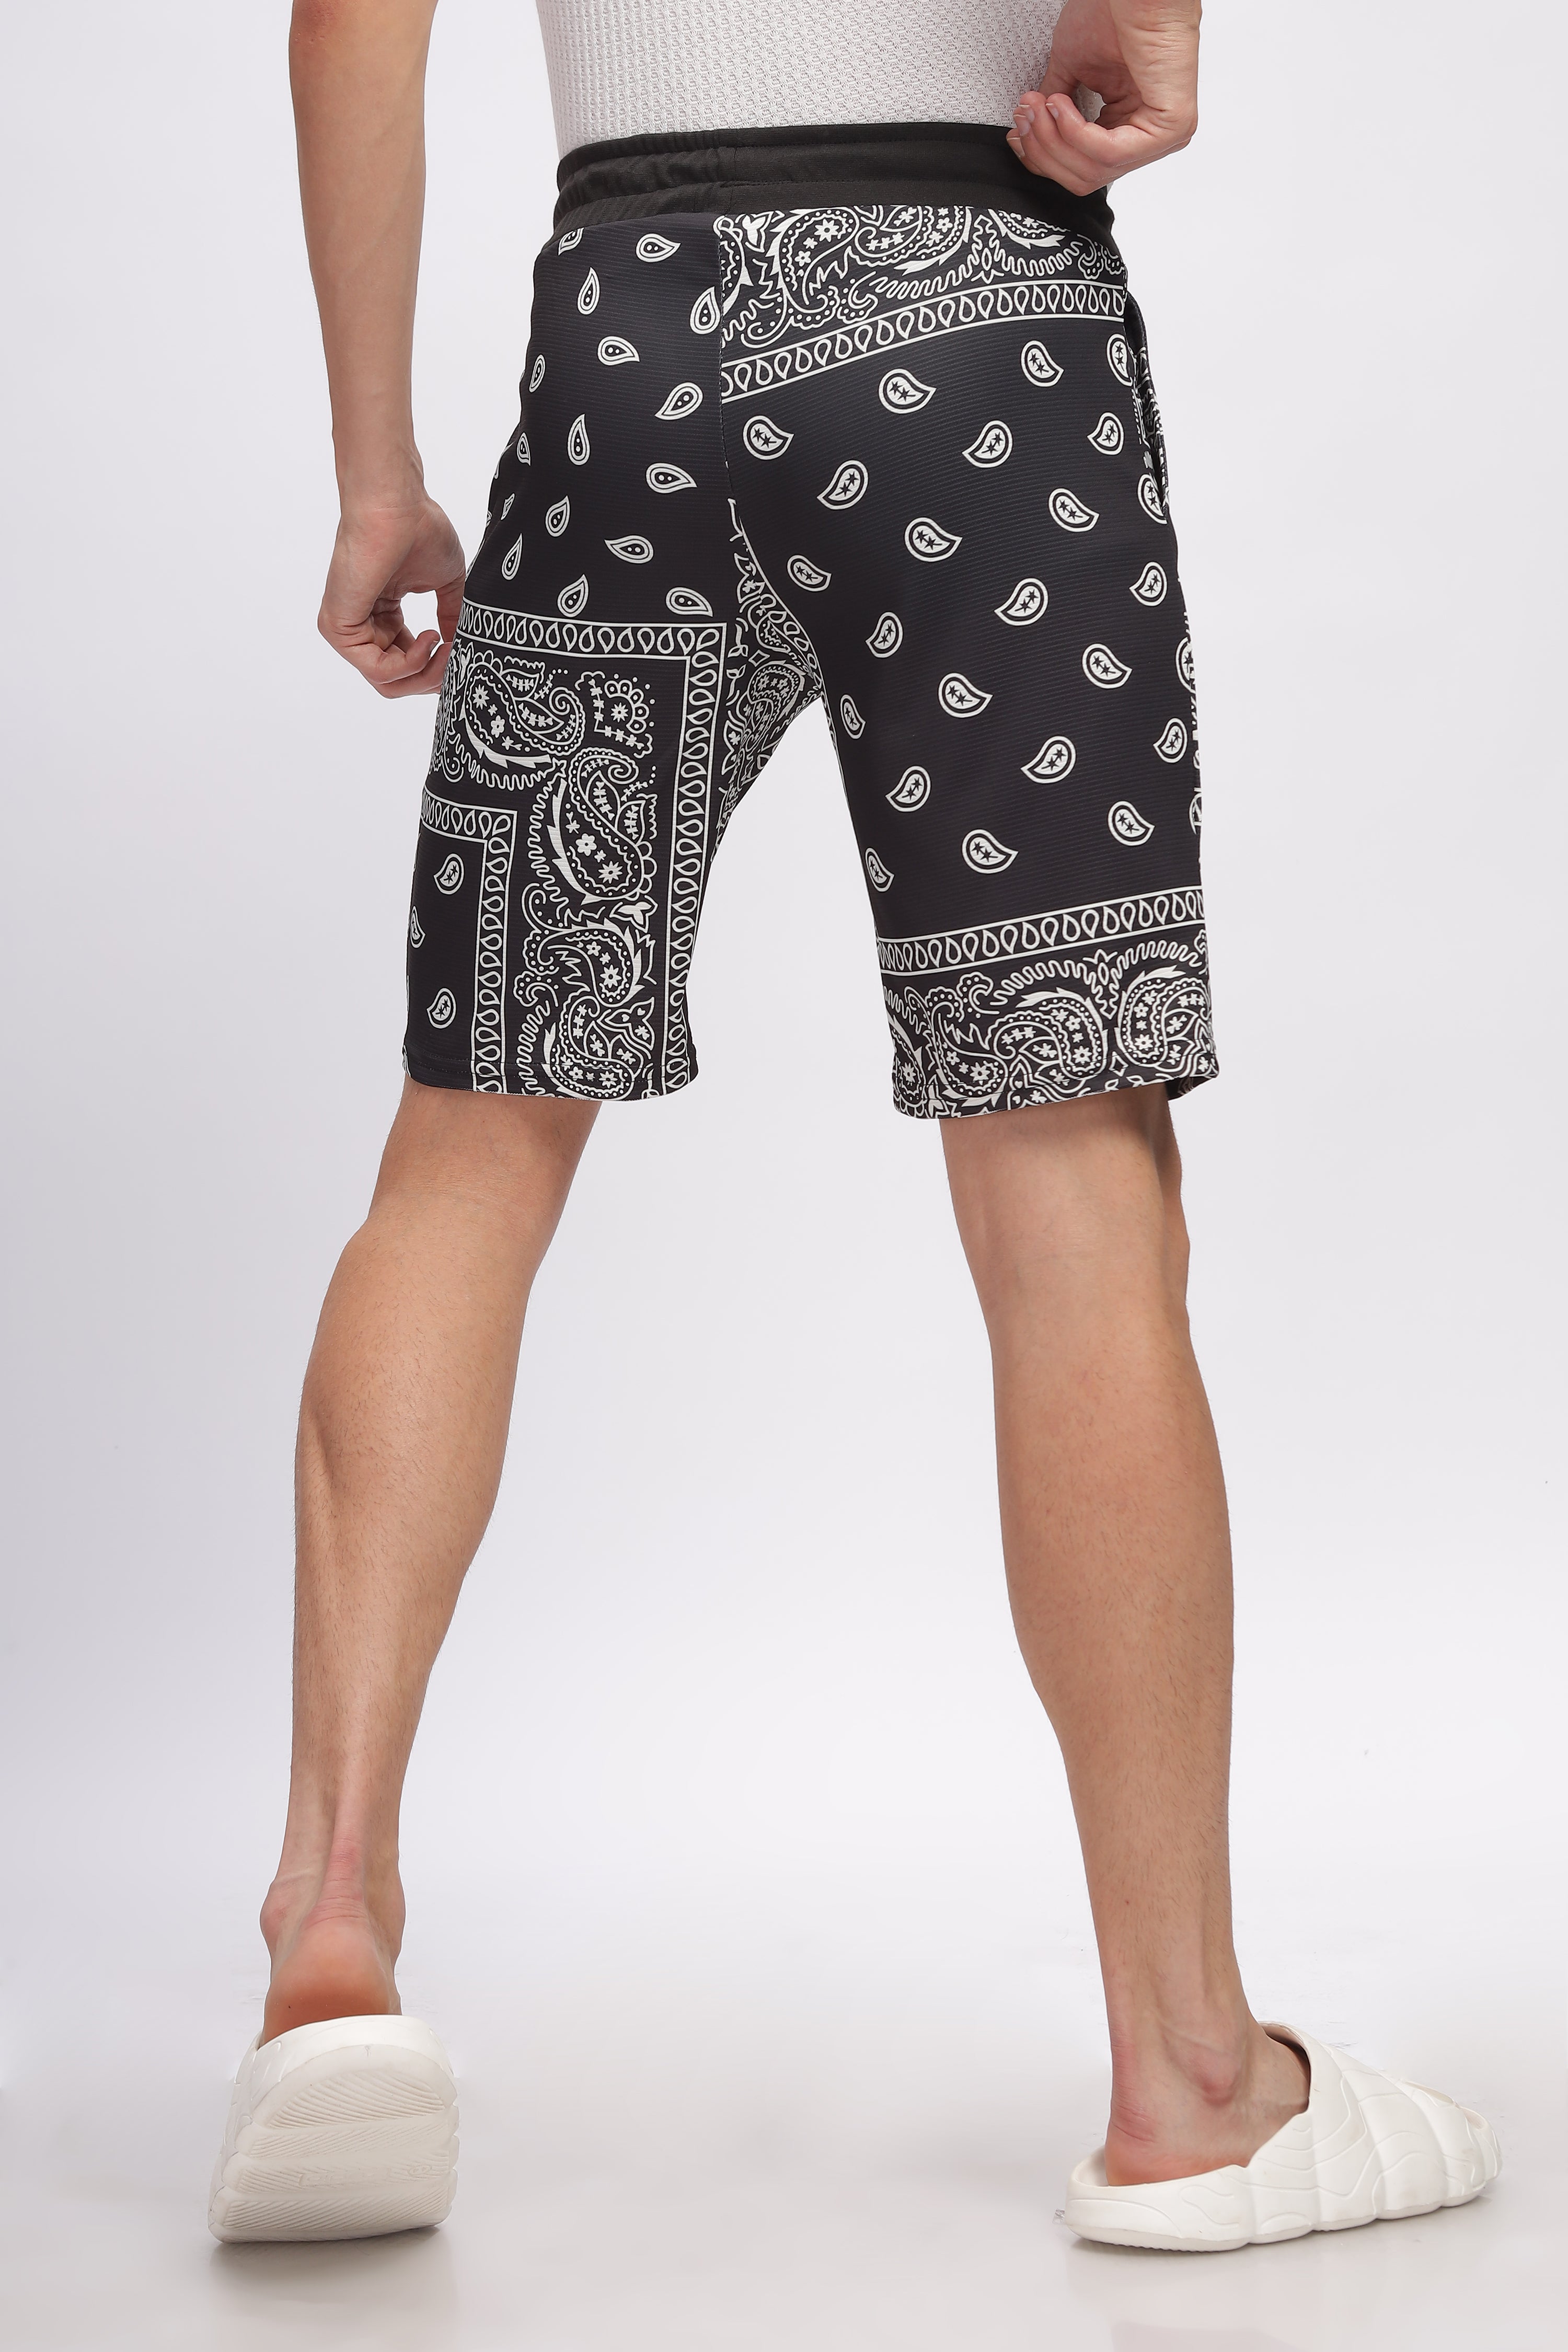 White Black Abstract Printed Summer Short